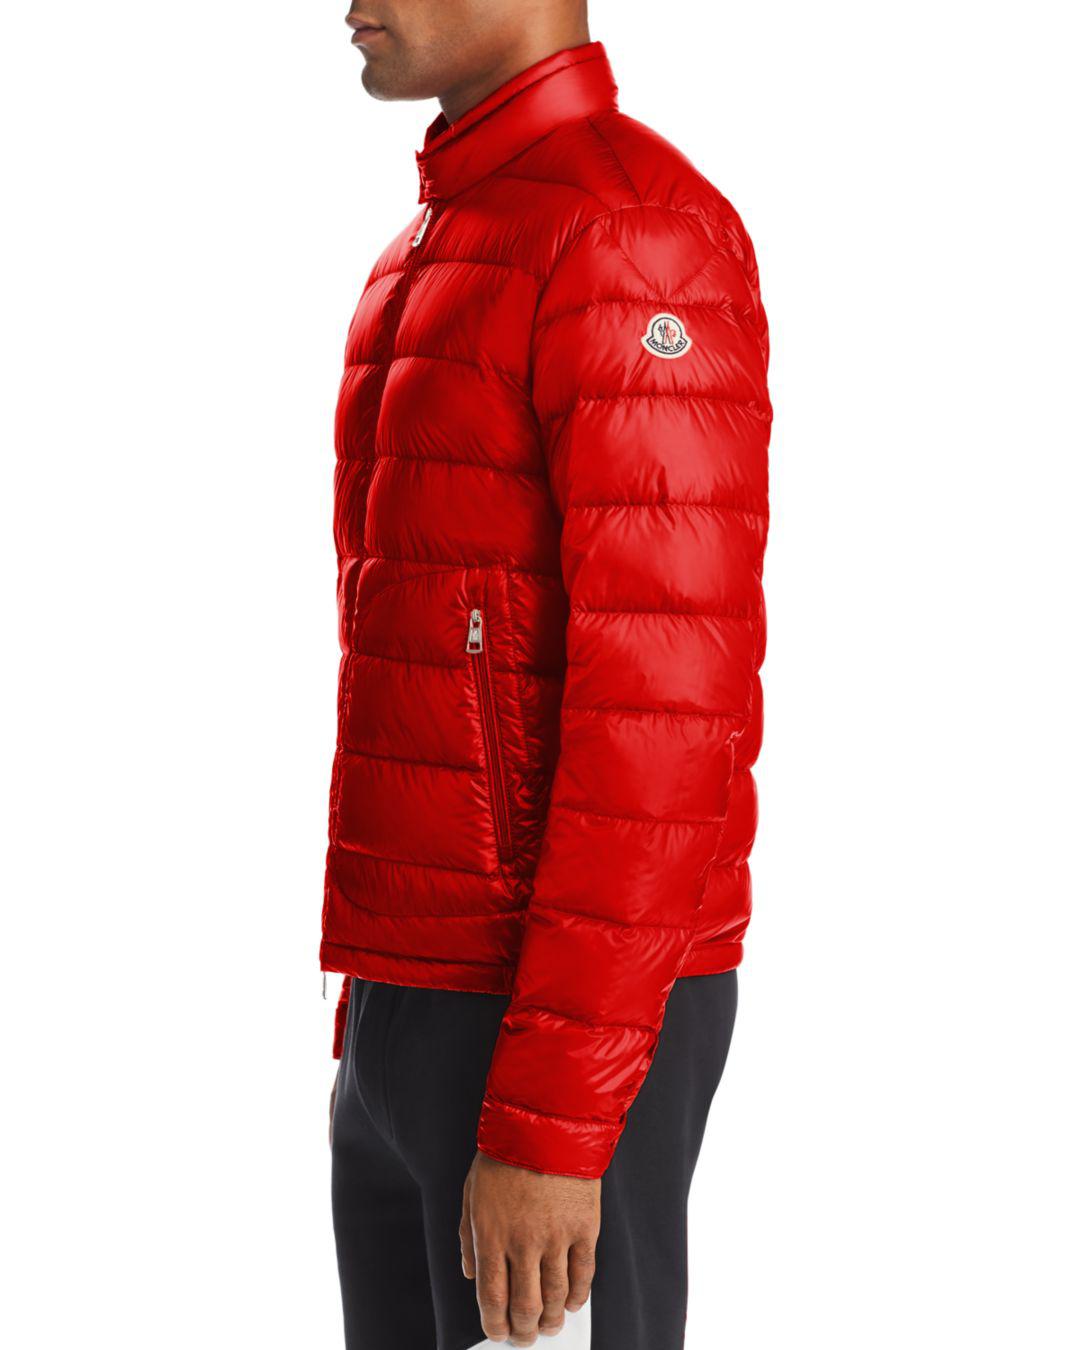 Moncler Acorus Lightweight Down Jacket in Red for Men - Lyst